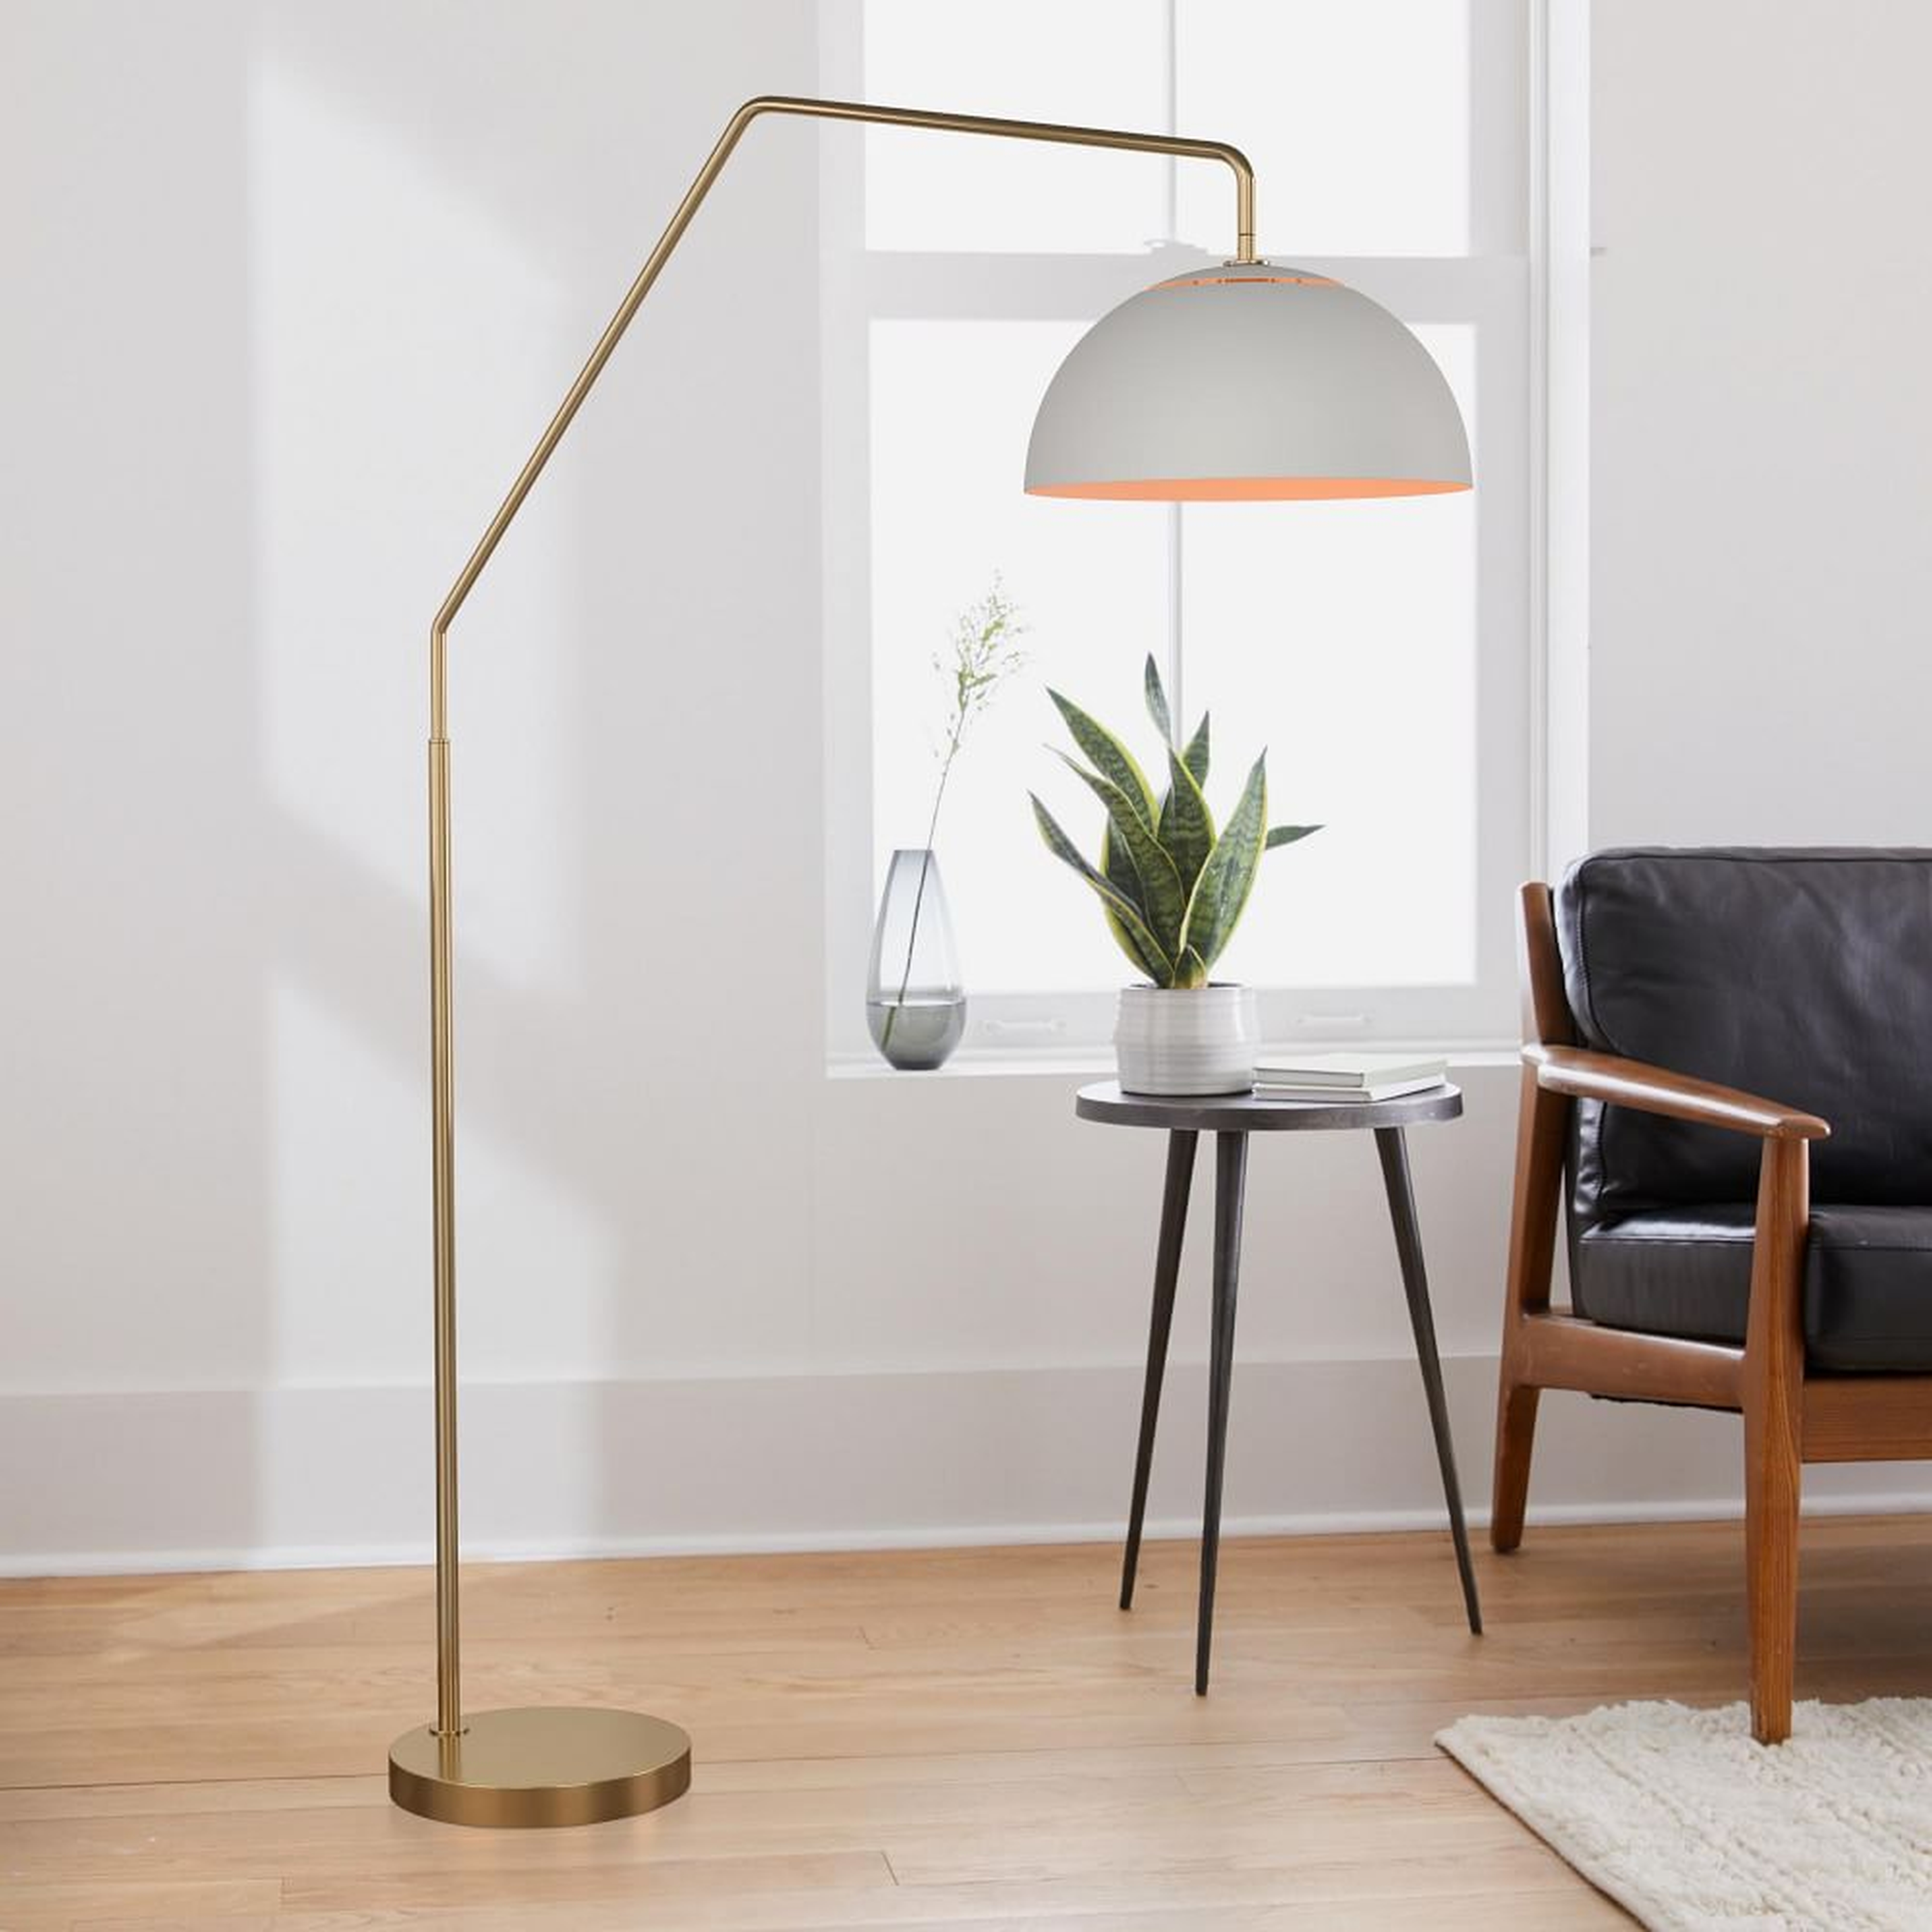 Sculptural Overarching Floor Lamp Antique Brass White Metal Dome (75") - West Elm